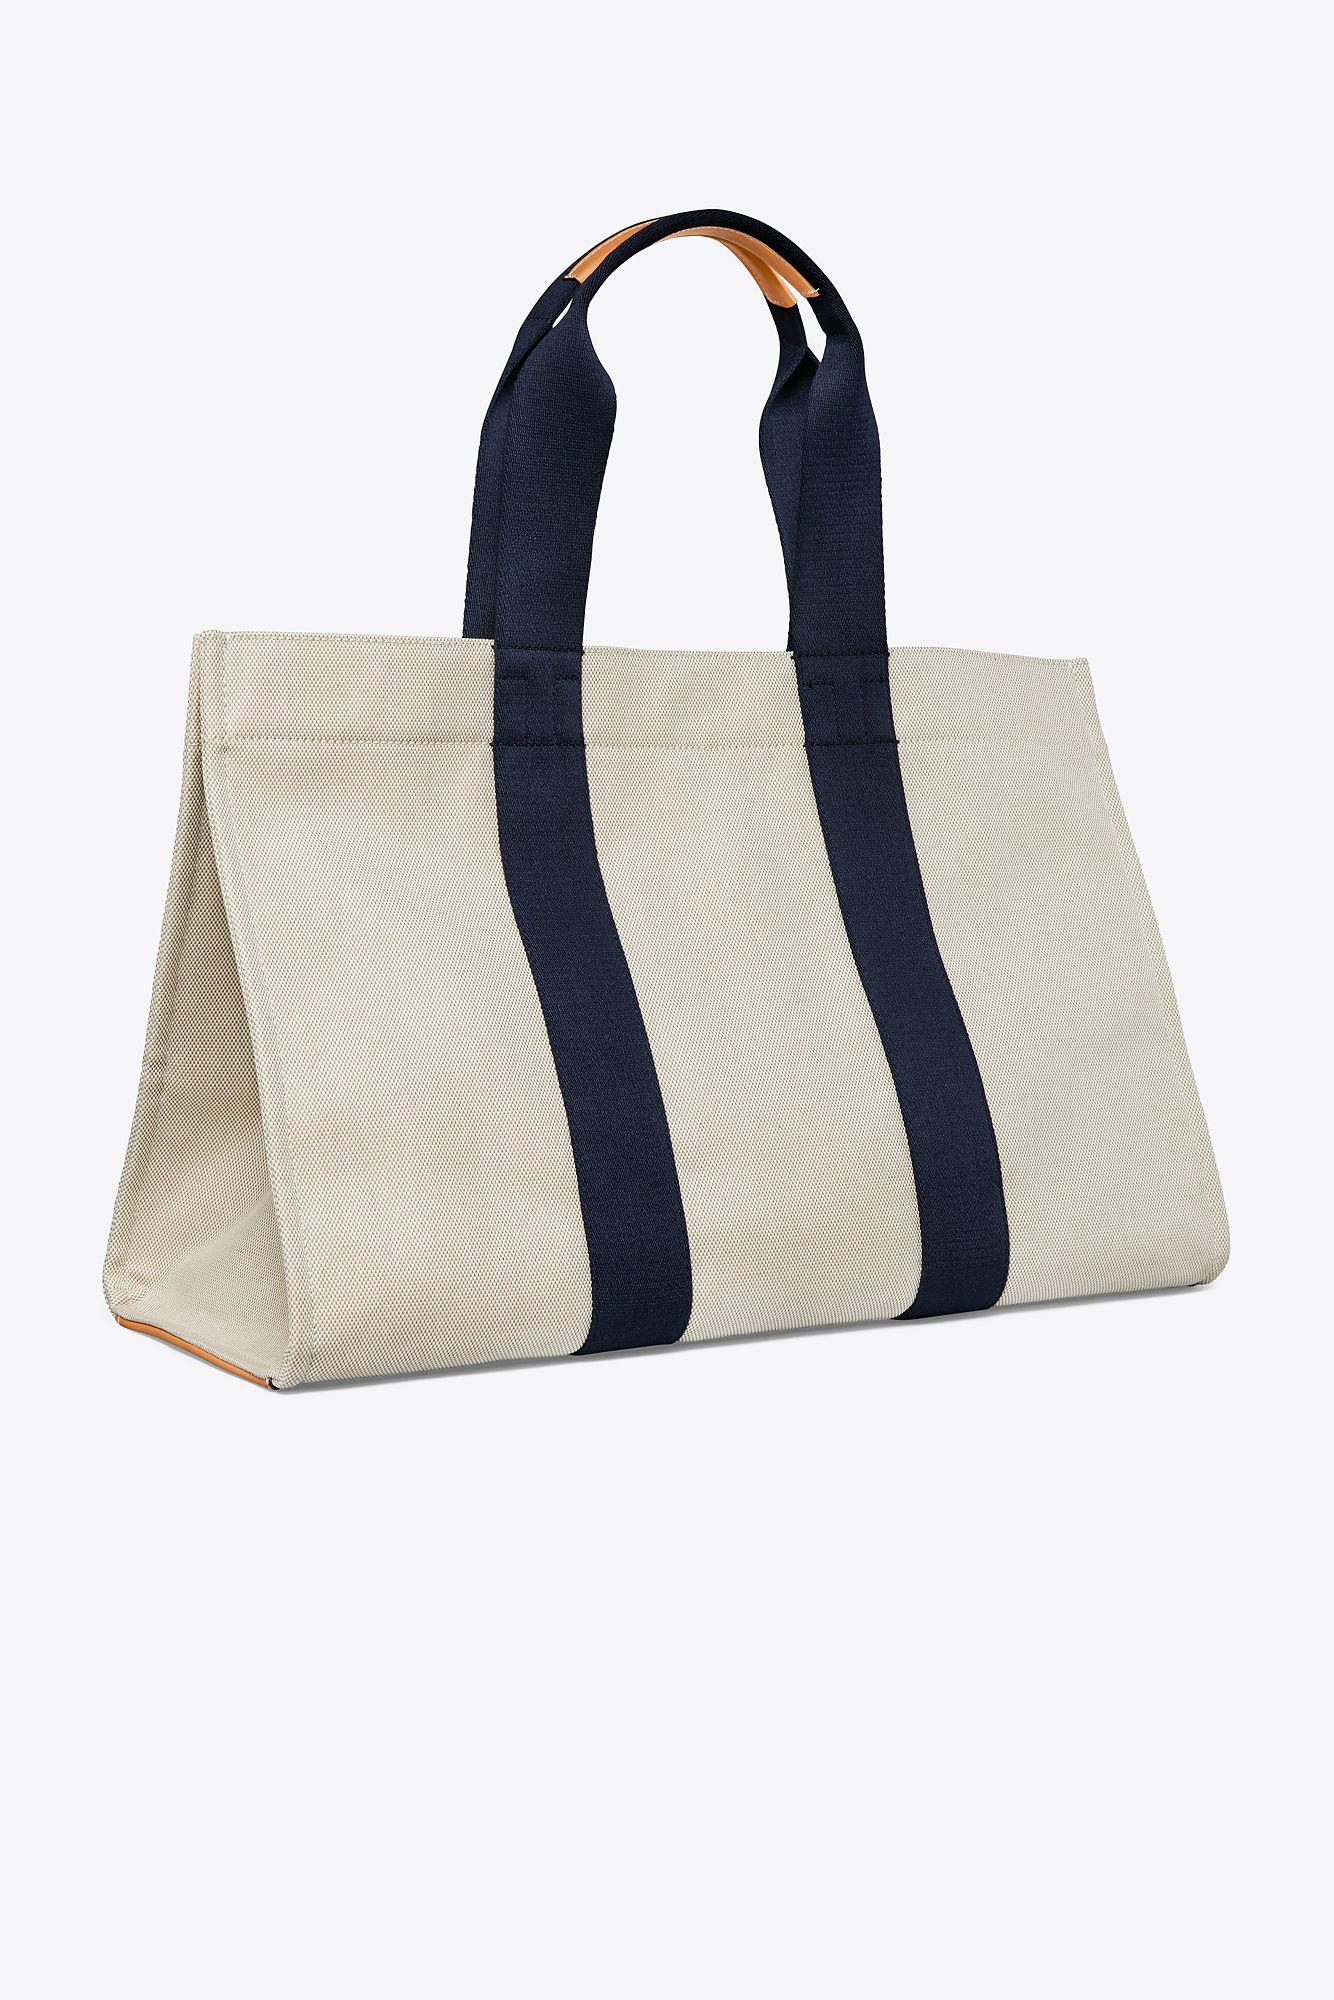 Tory Burch Miller Large Canvas Tote in Blue | Lyst